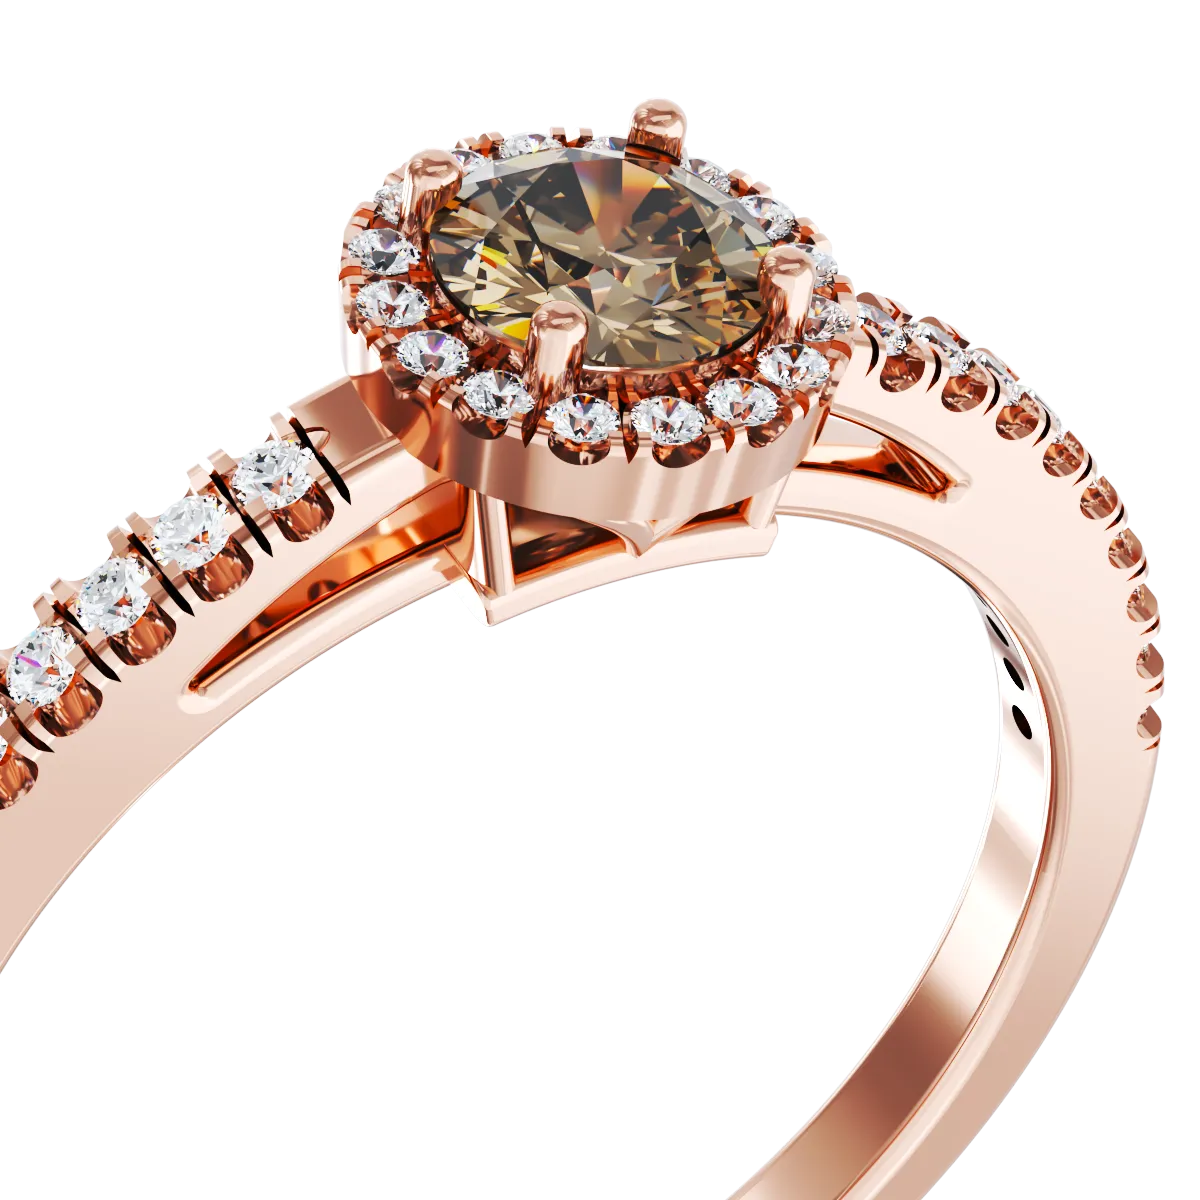 18K rose gold engagement ring with 0.51ct brown diamond and 0.21ct diamonds